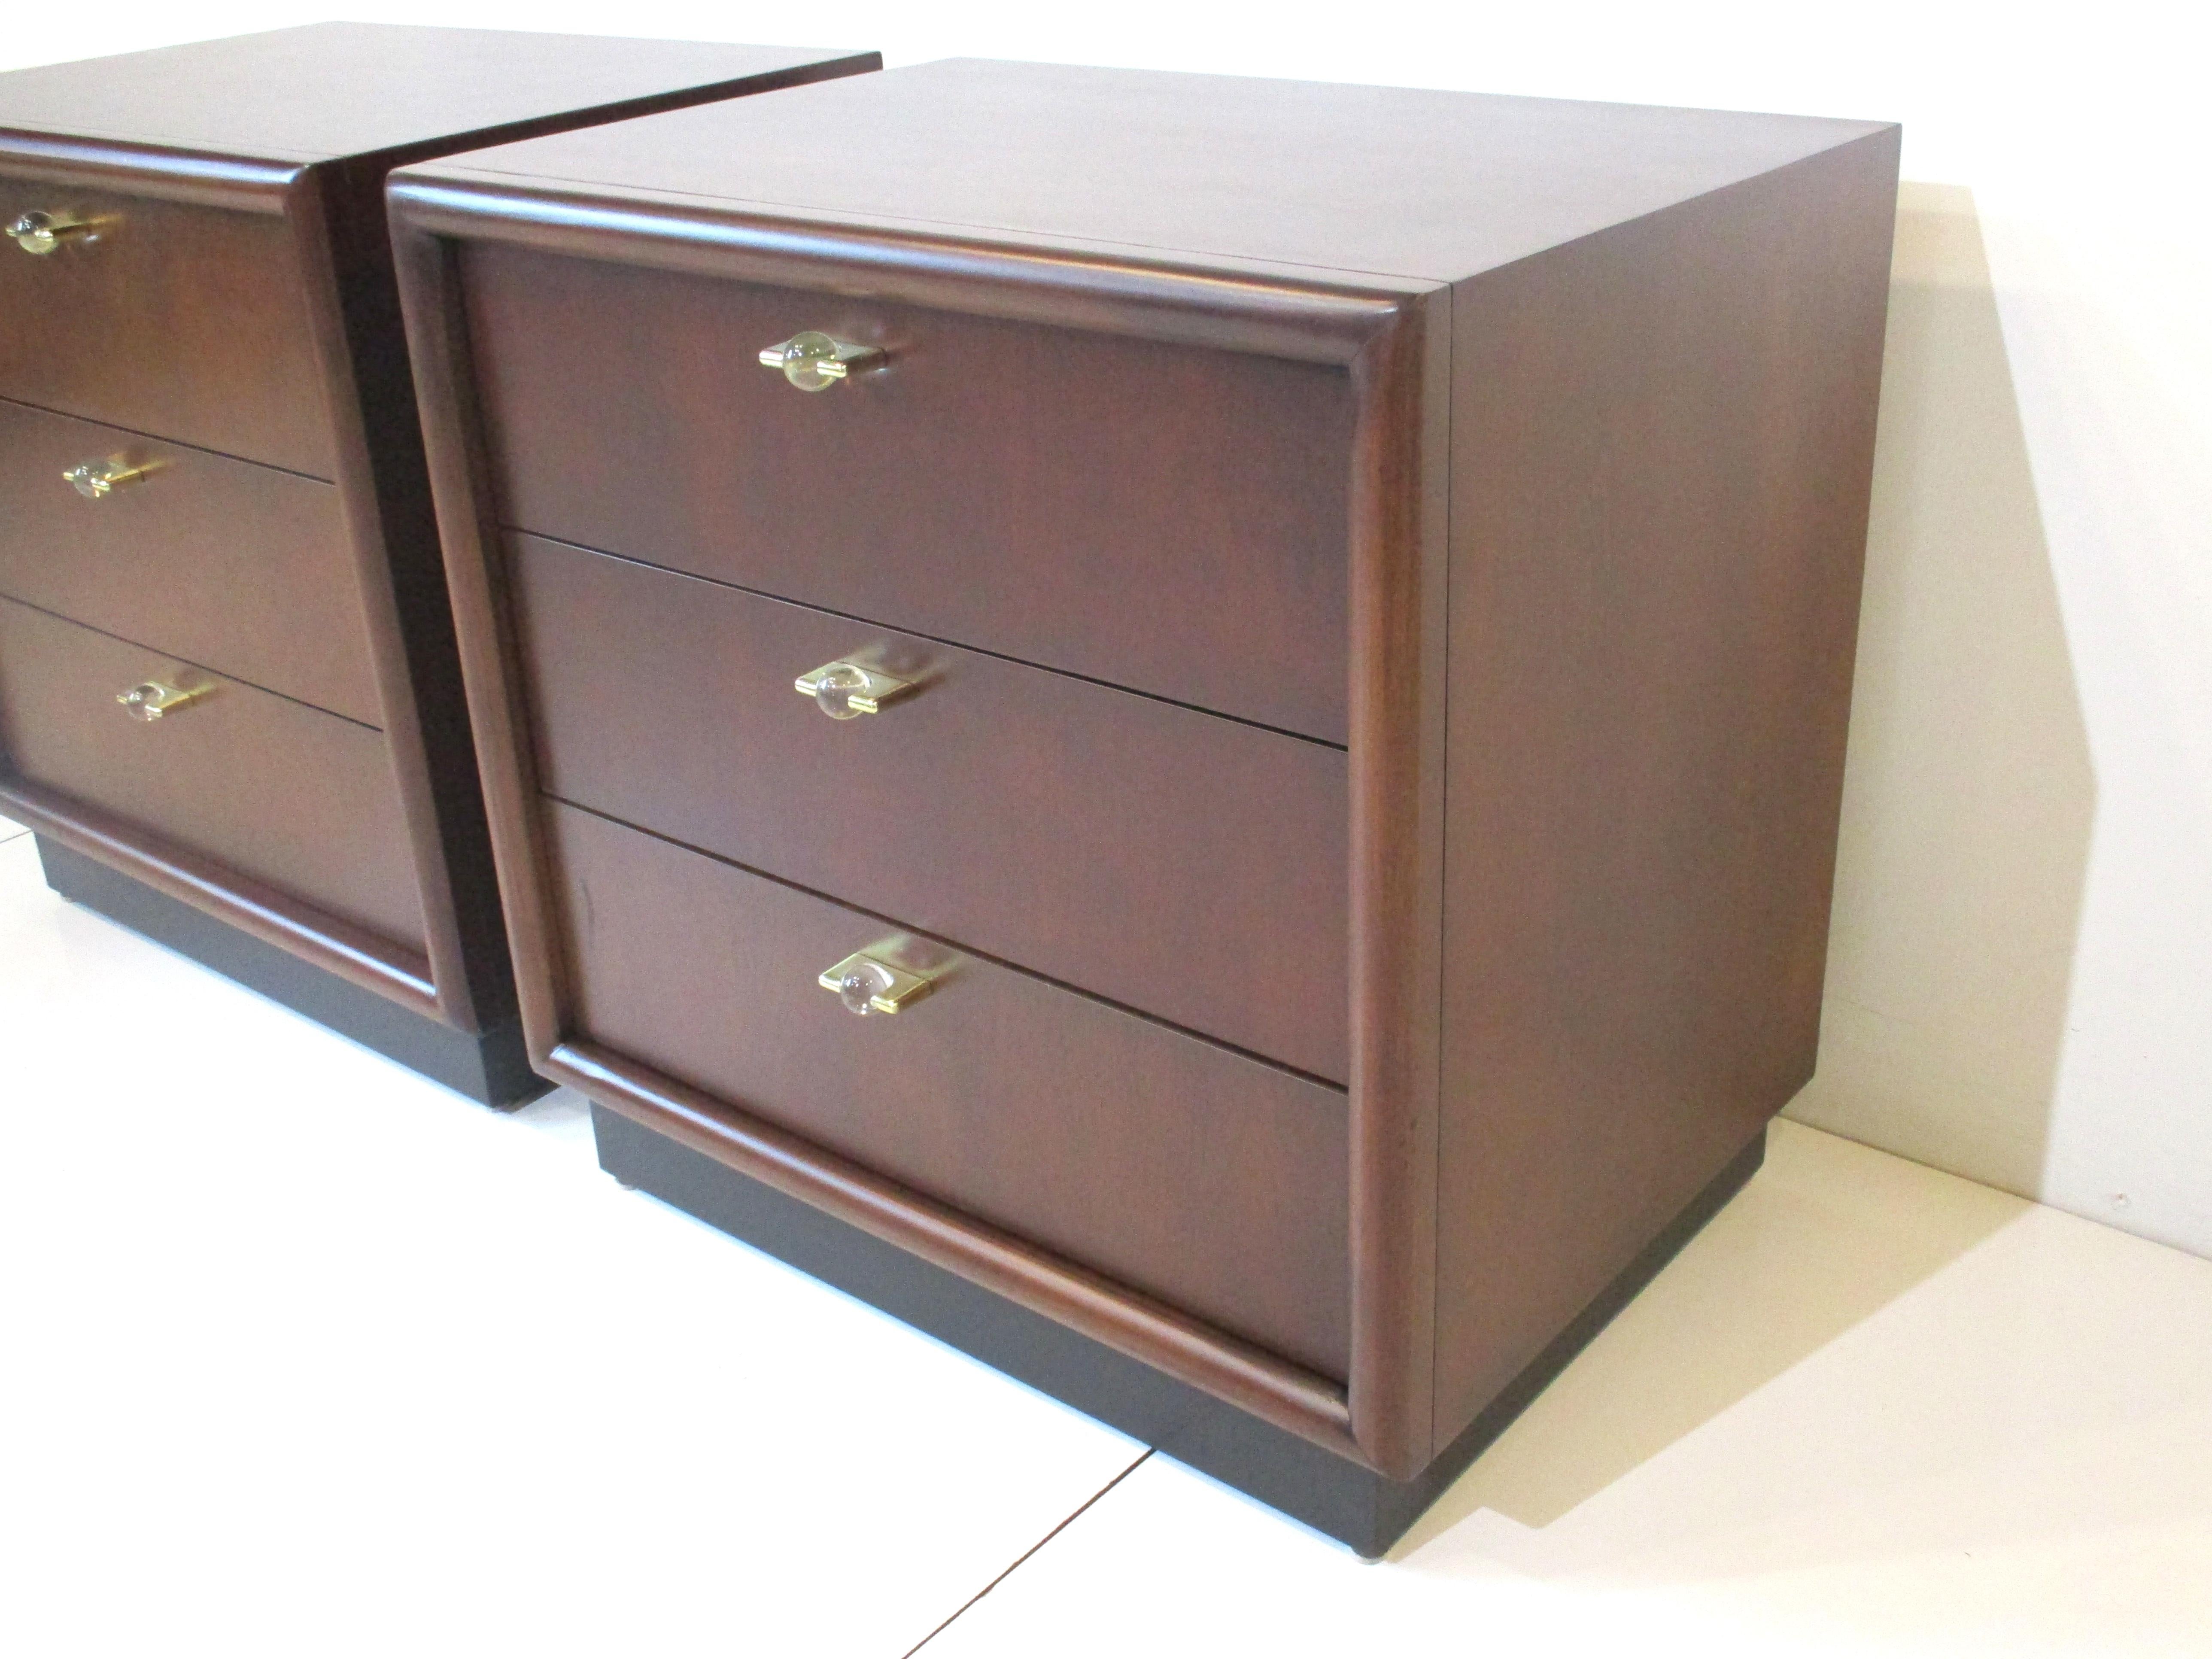 A pair of very well crafted nightstands in medium dark toned mahogany, three drawers with flat brass pulls with clear round Lucite balls to the front. The lower area has a satin black kick styled base and retains the manufactures label by the